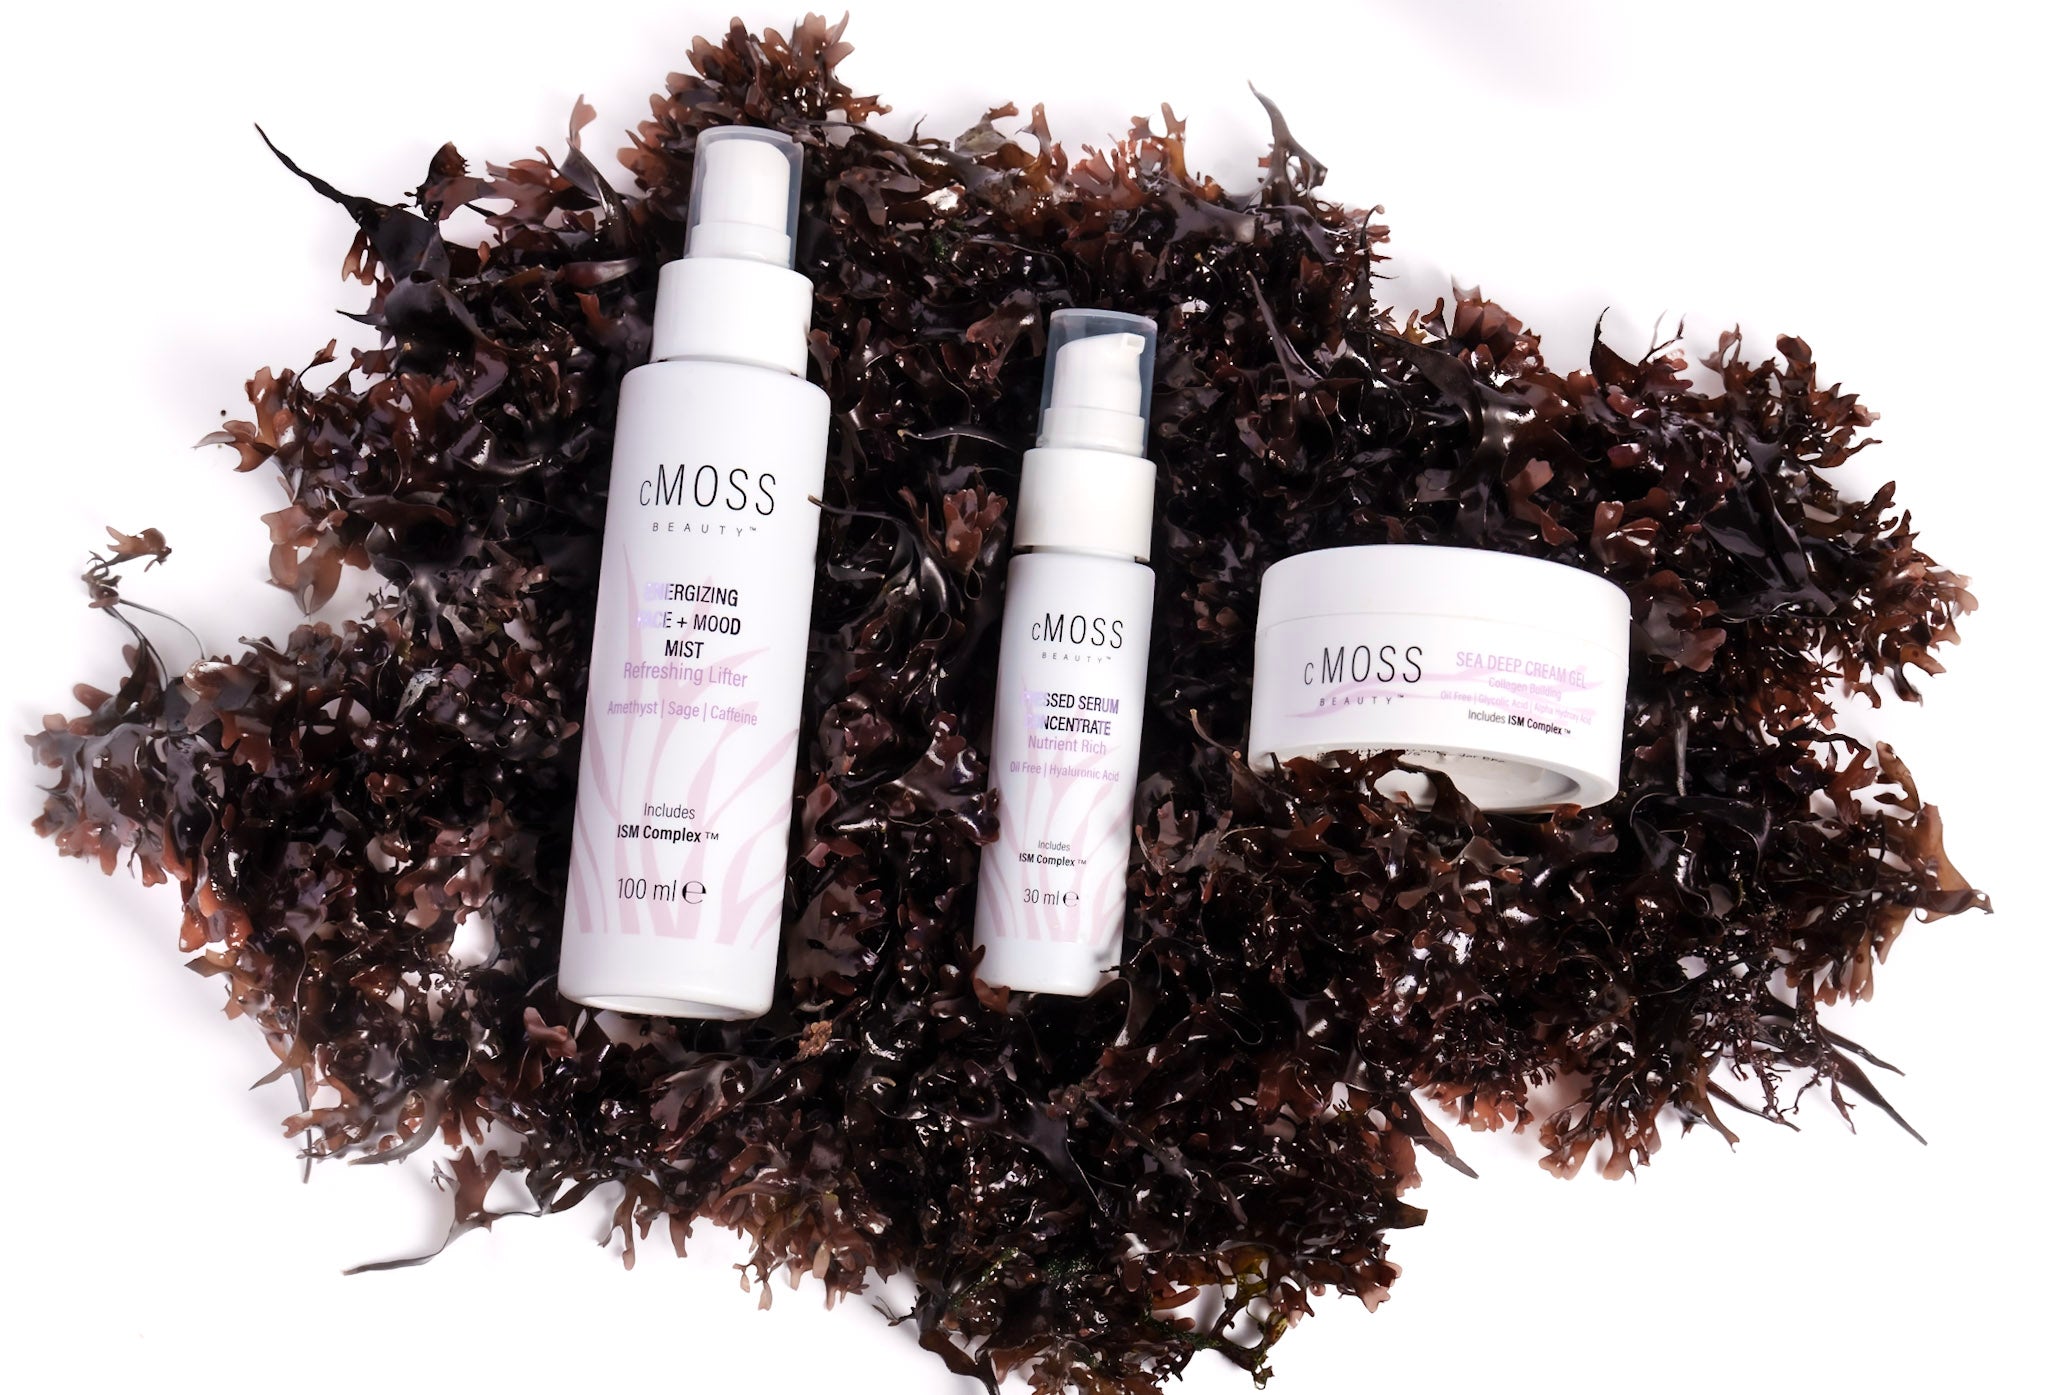 cmoss energizing face and mood mist, pressed serum concentrate and sea deep cream gel over bed of irish sea moss